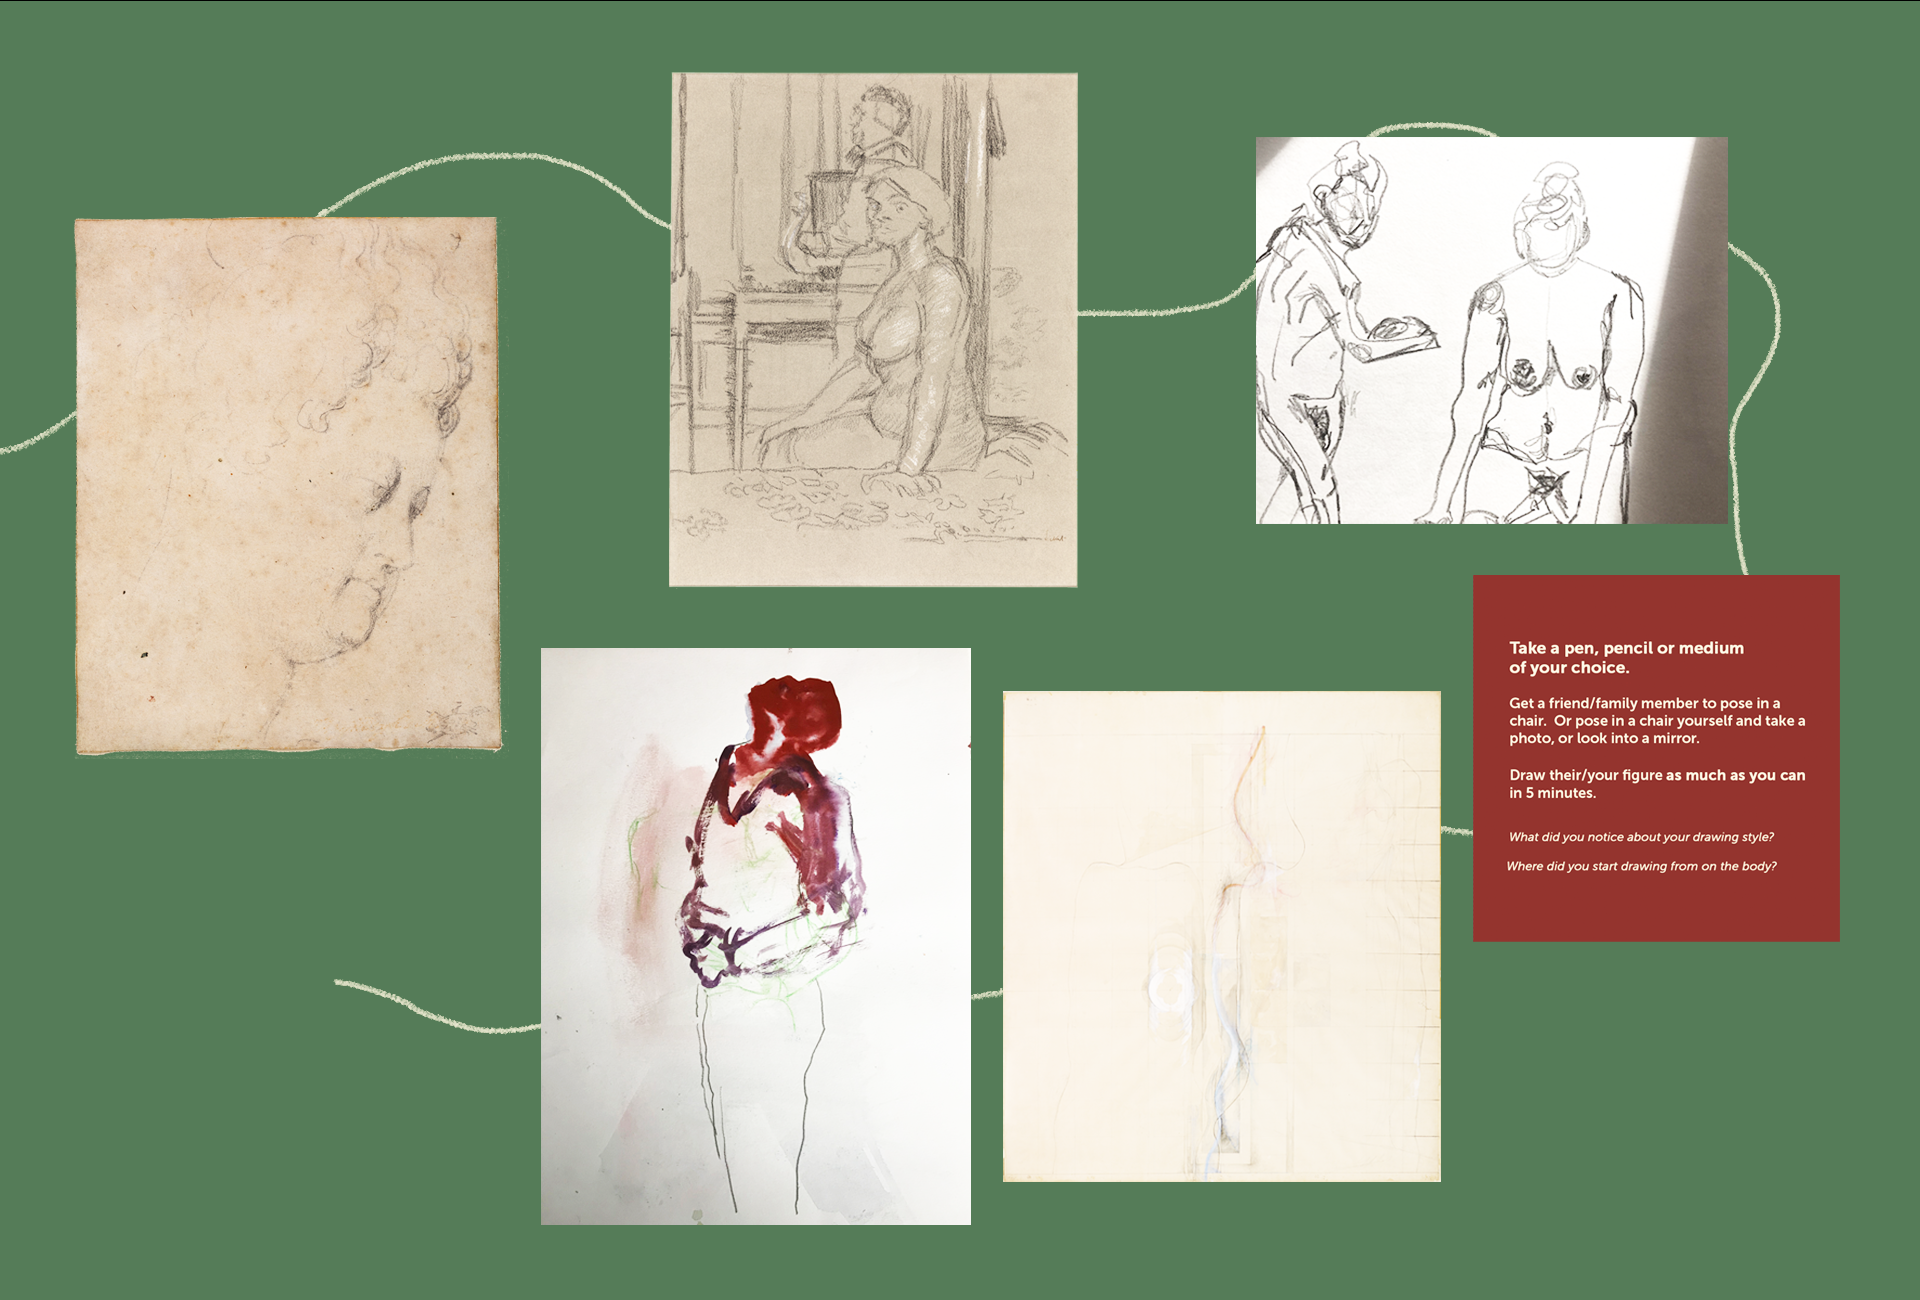 Rubens to Sickert: The Study of Drawing